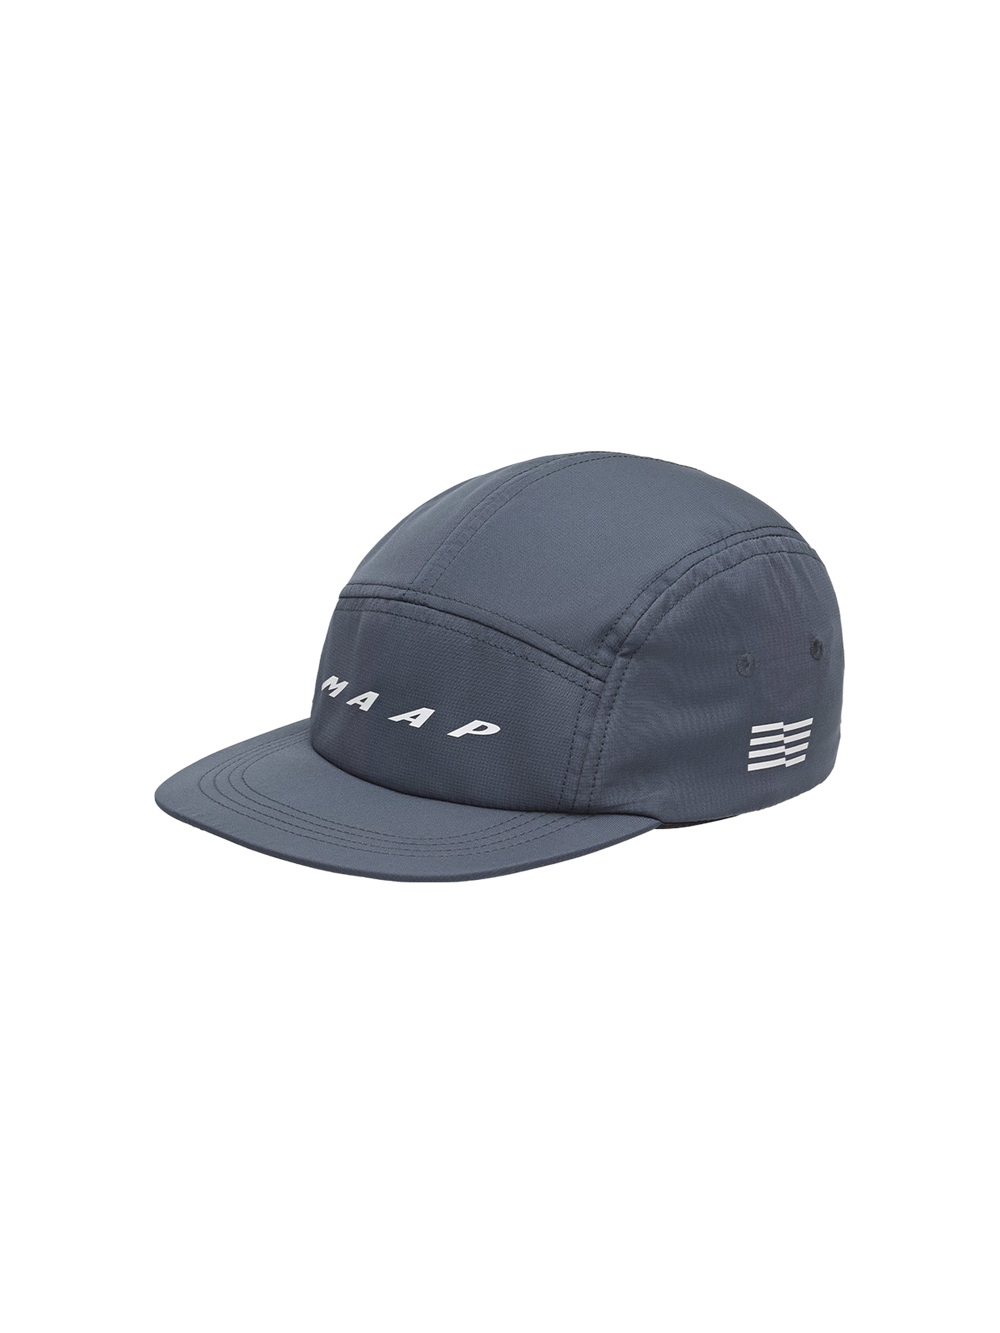 Product Image for Evade 5 Panel Cap